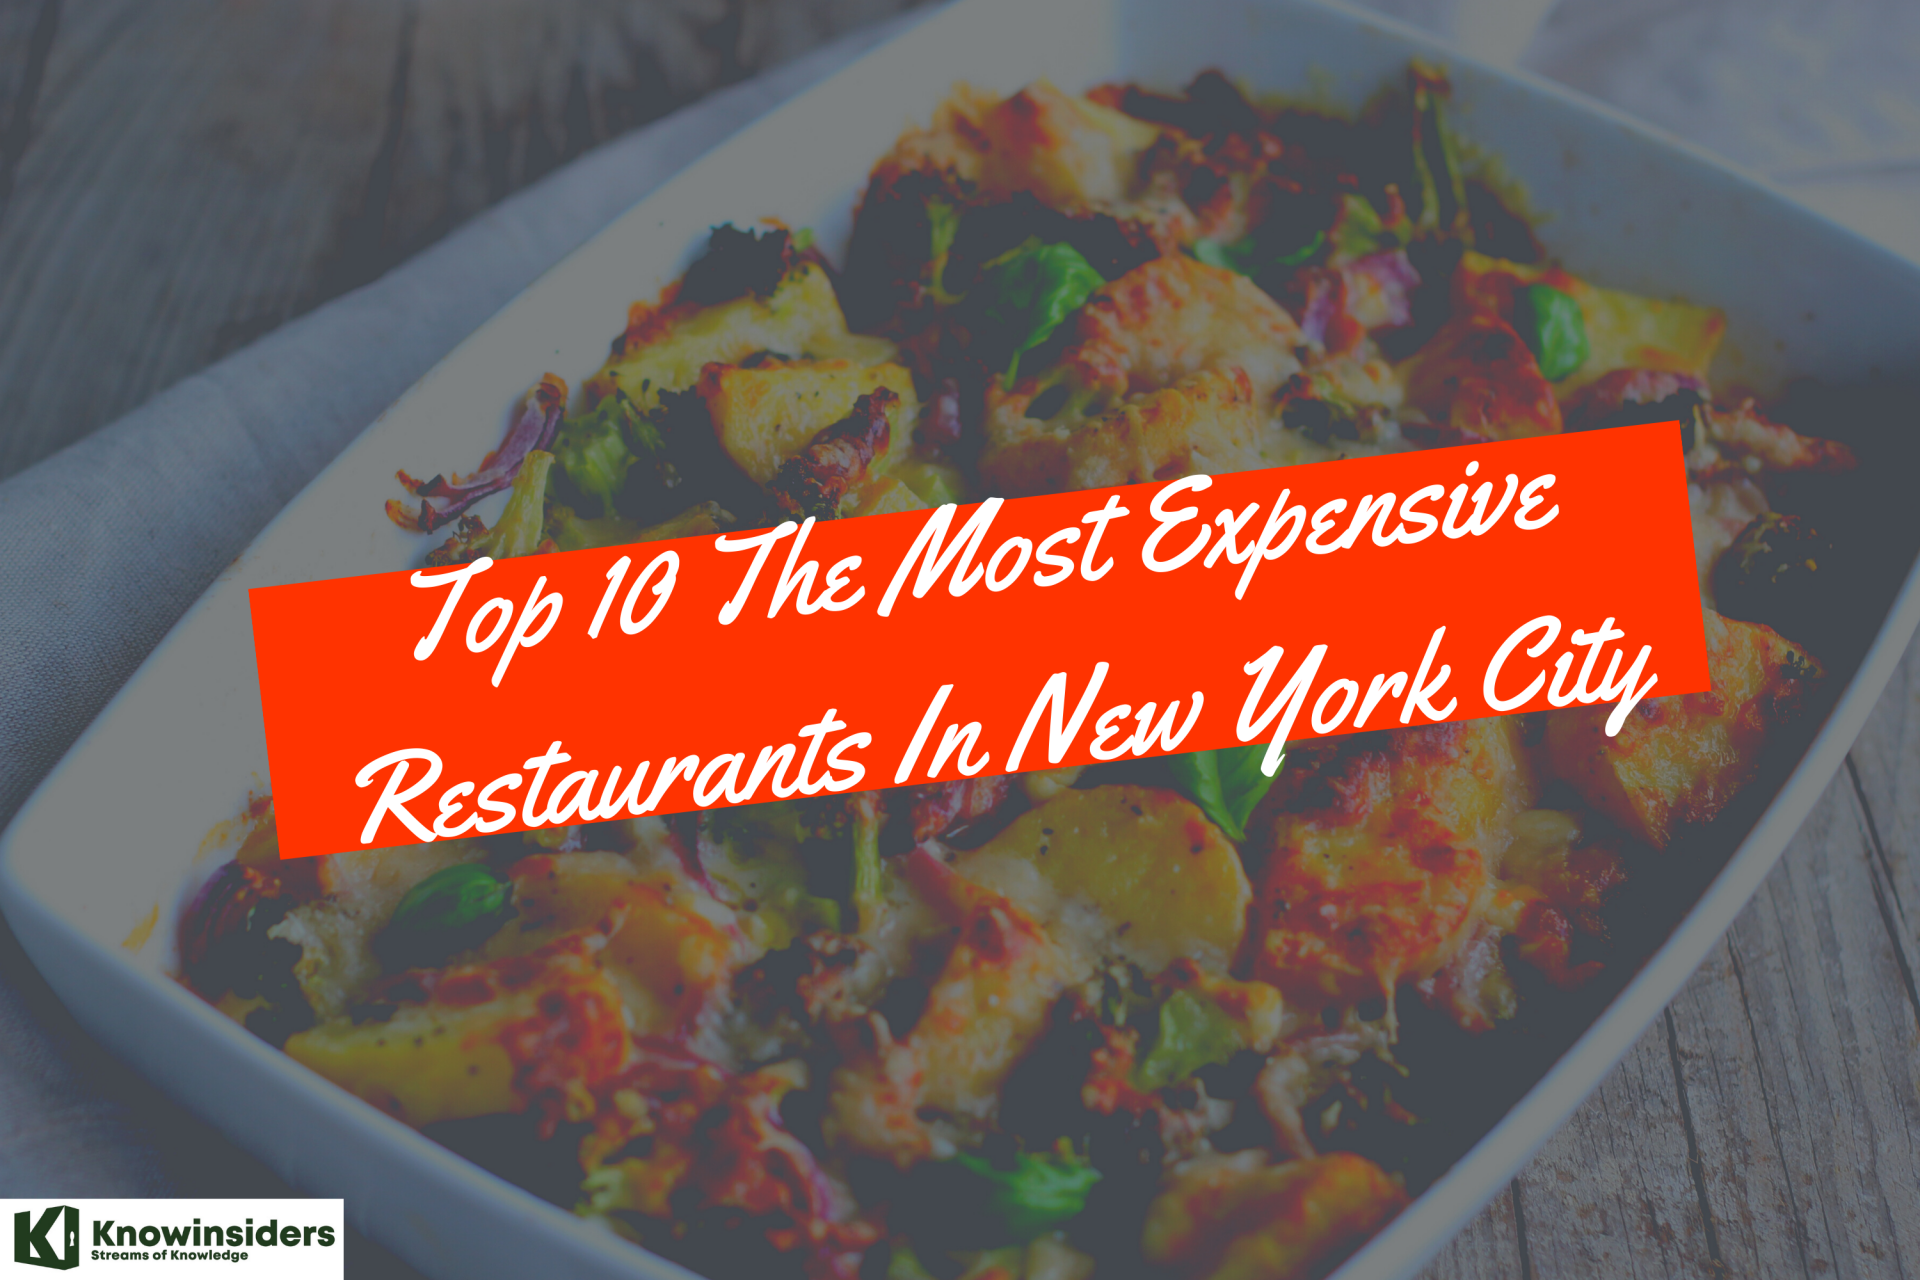 What are The Most Expensive Restaurants In New York City (Top 10)?